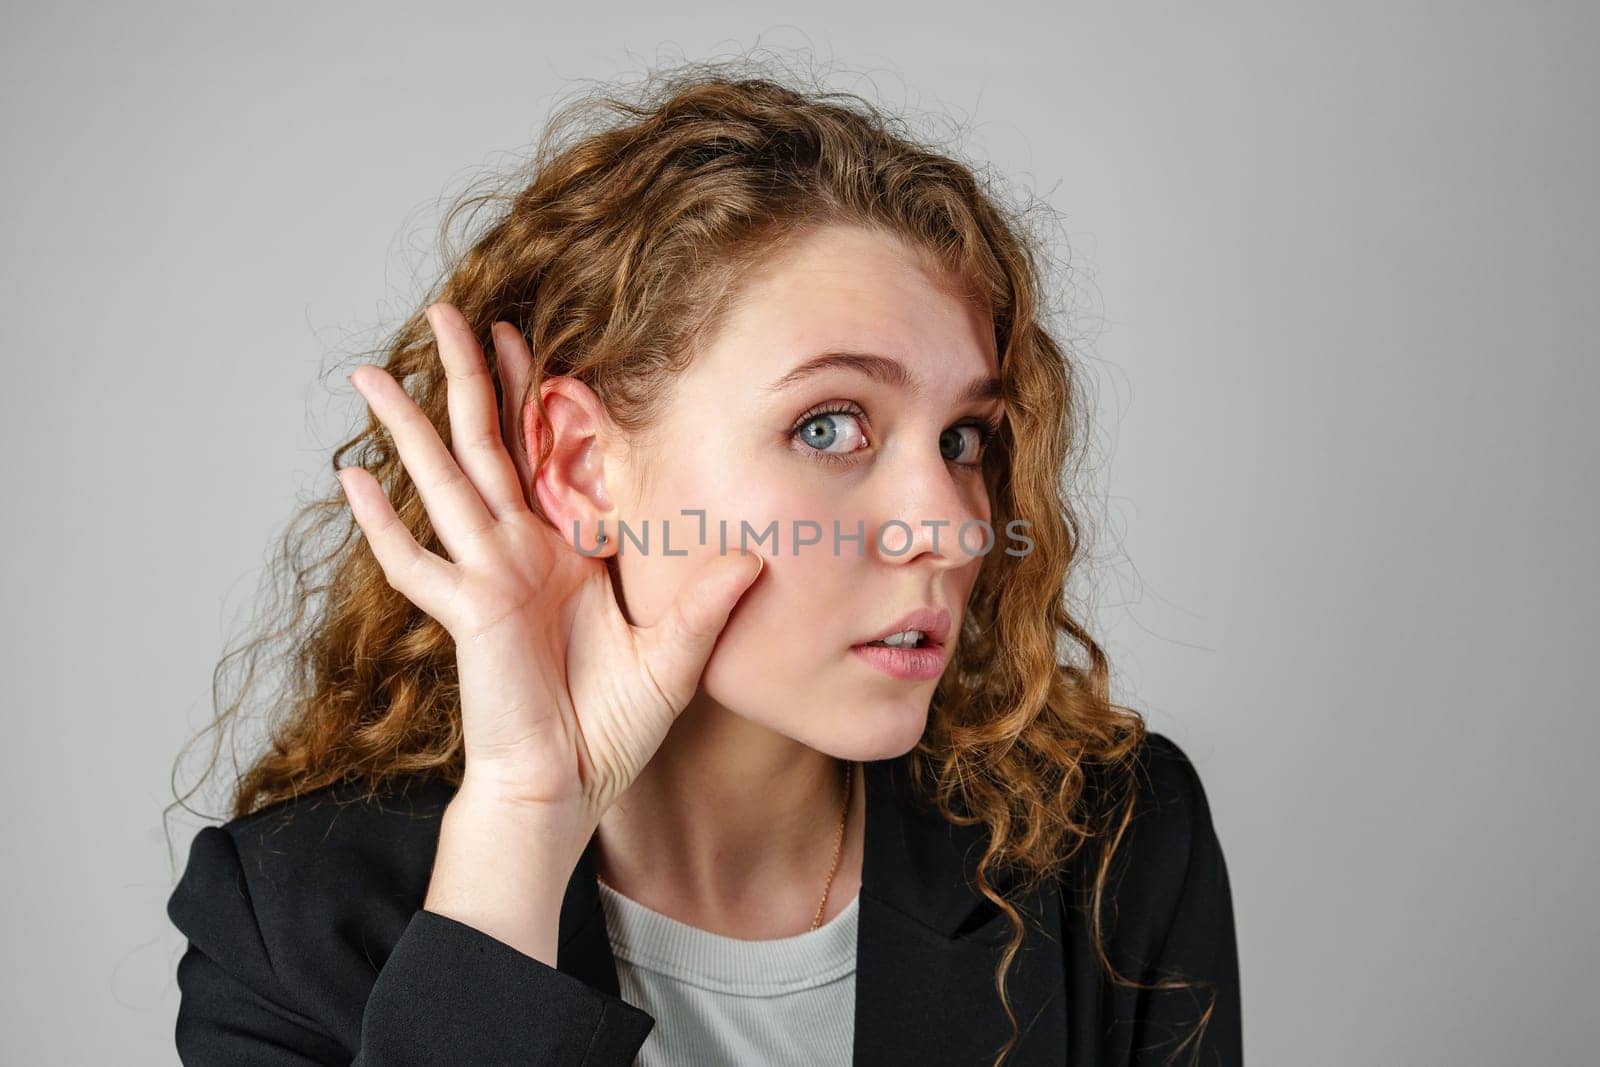 Young Woman Listening With Hand to Ear in Studio